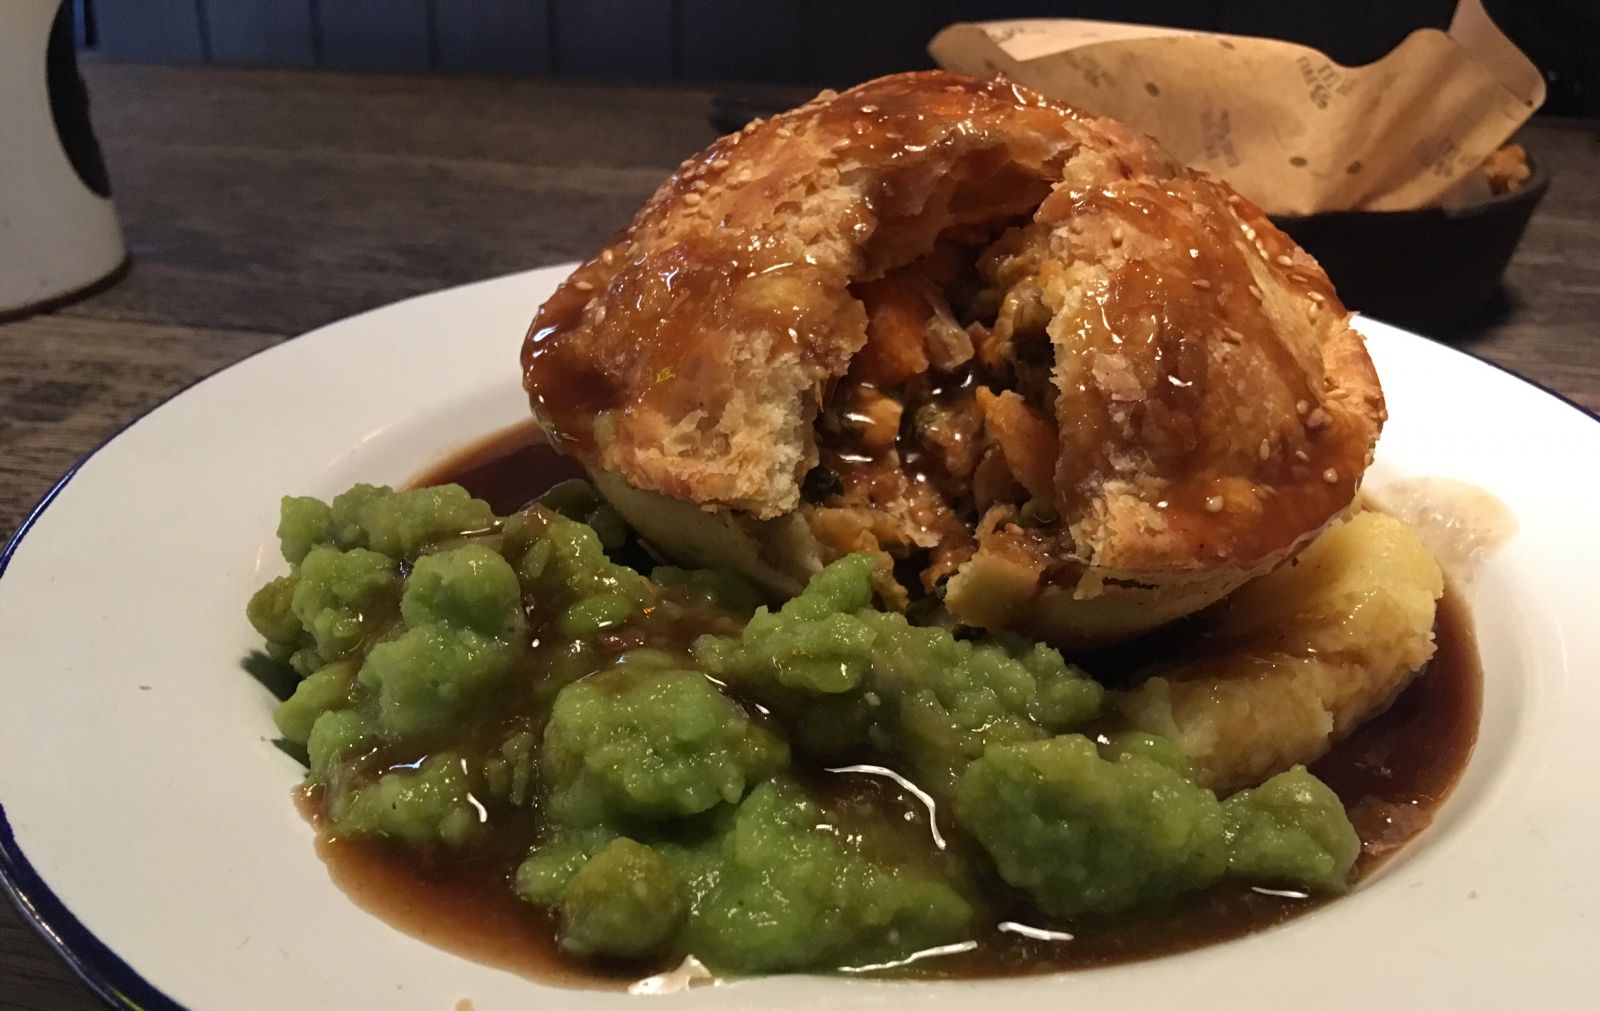 All pies are served with gravy on the side, of course.